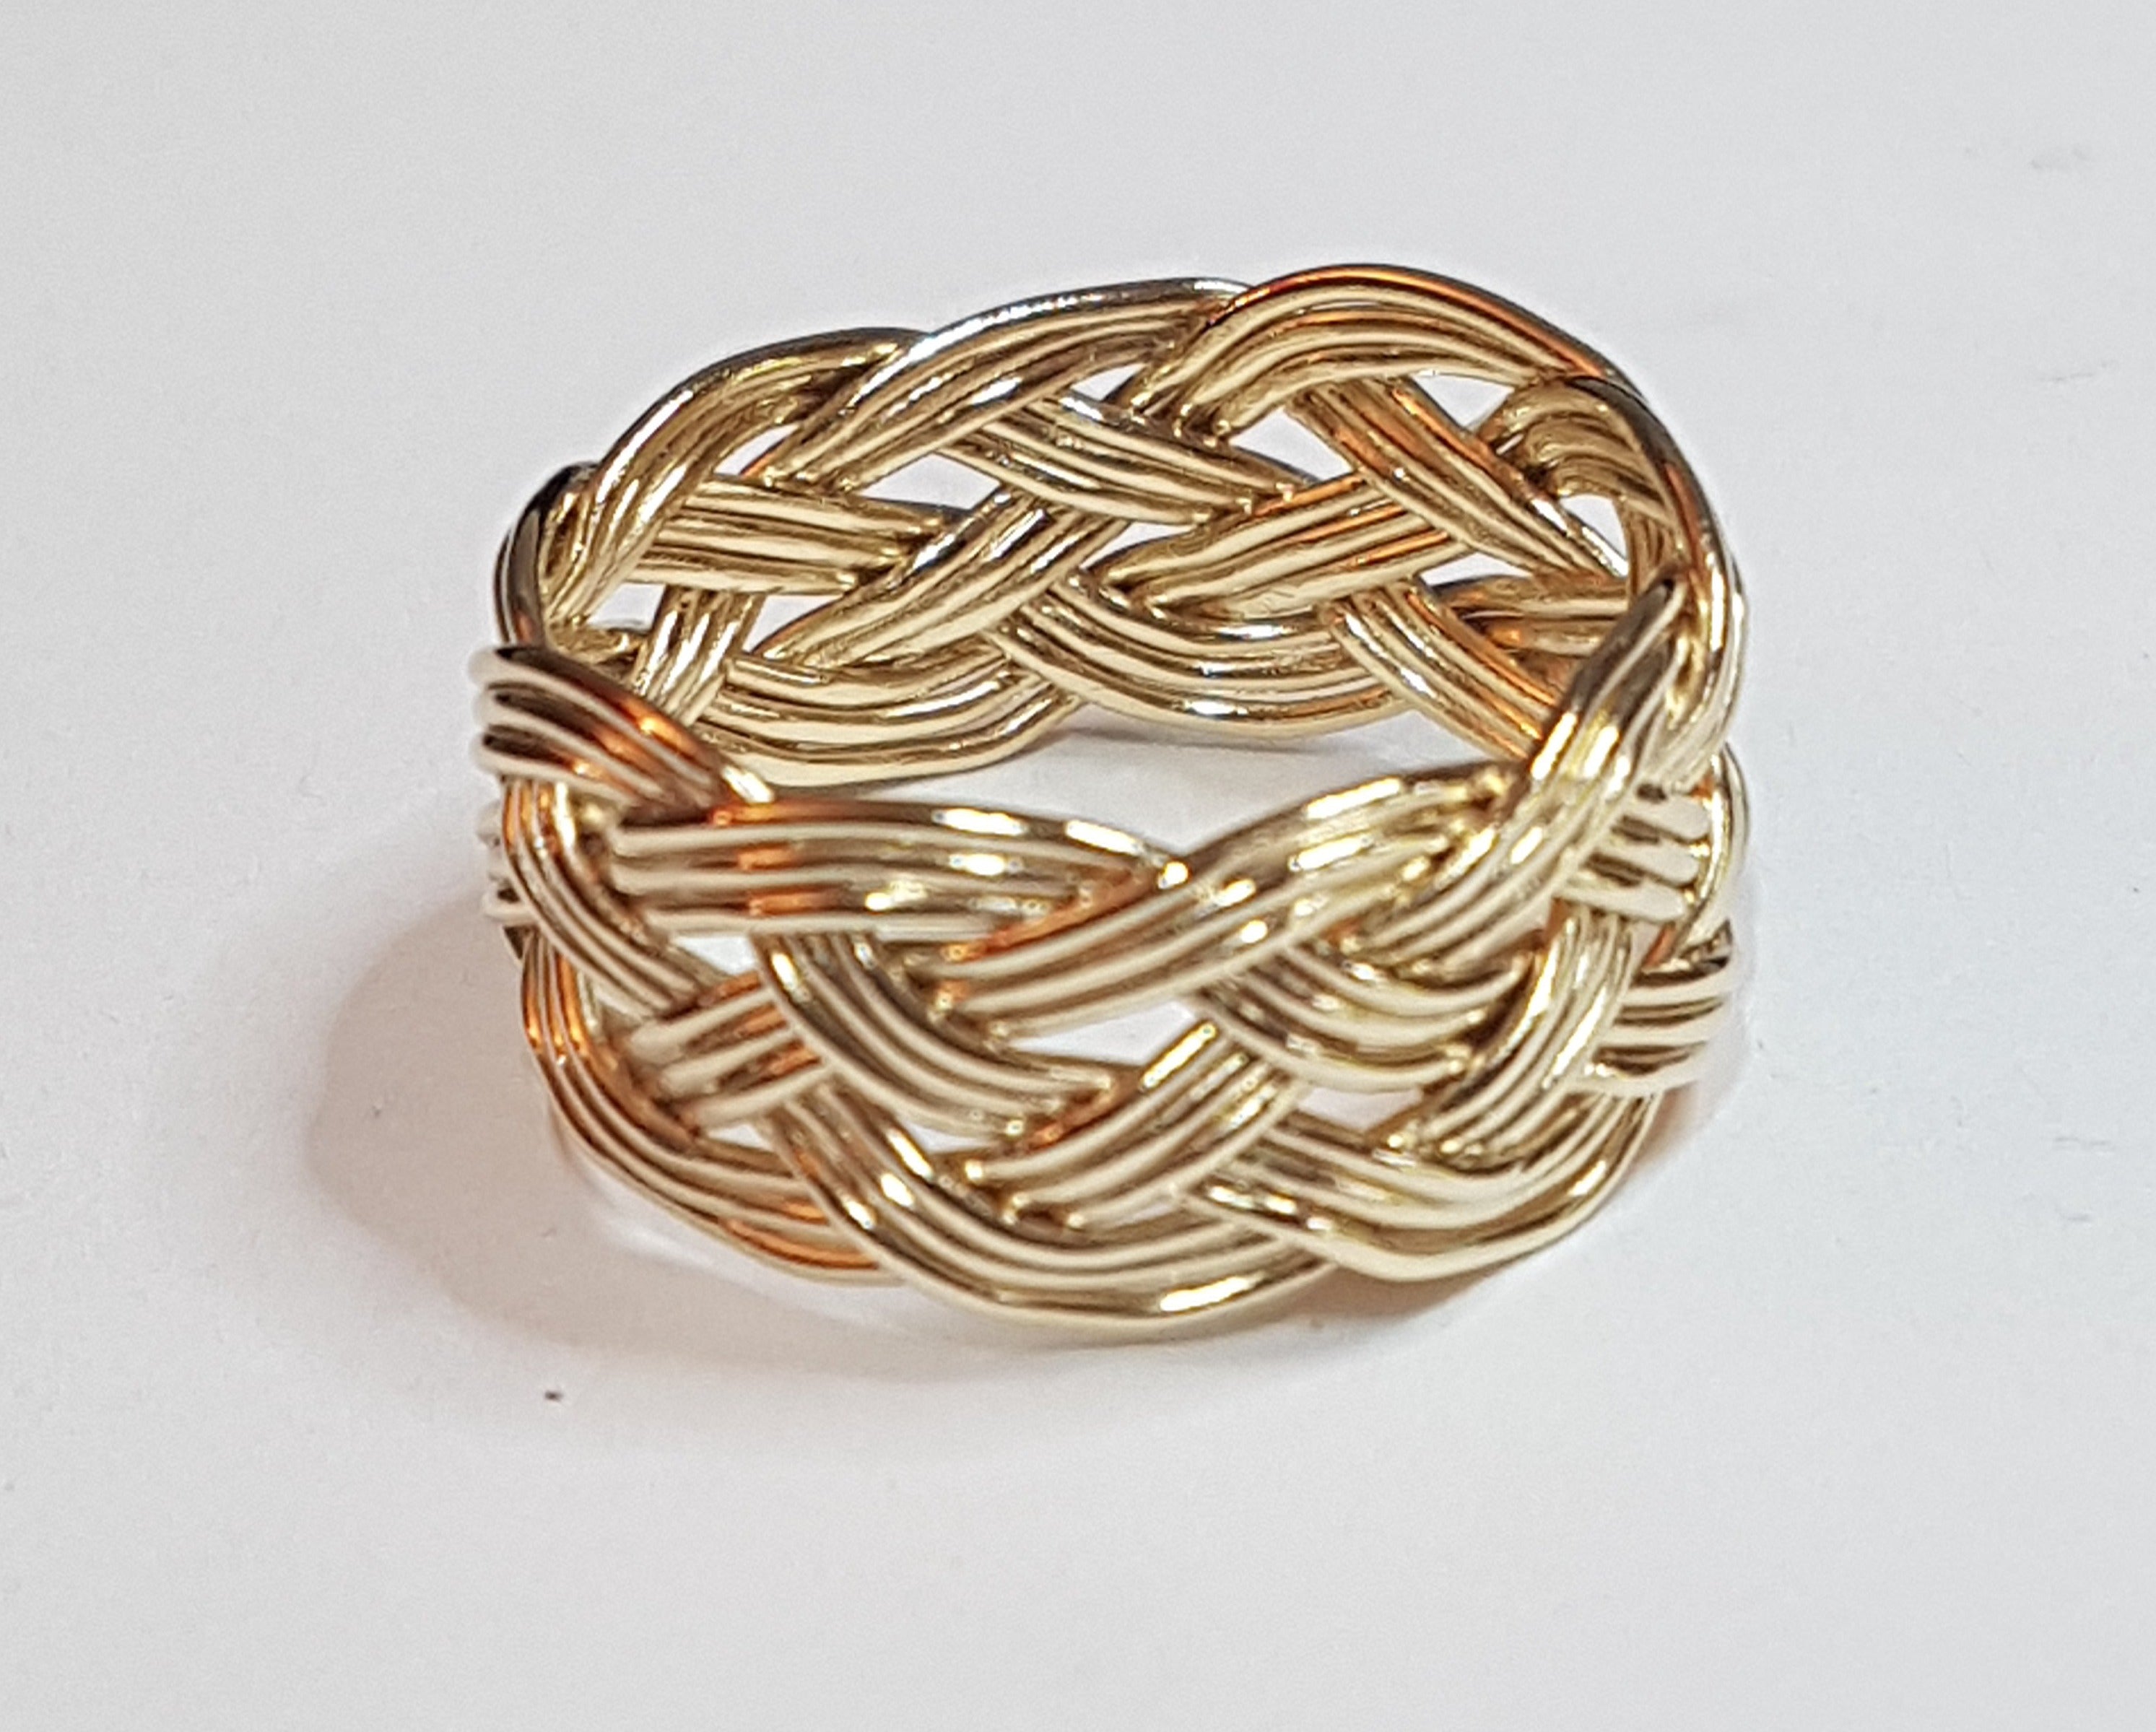 Turks Head Knot Ring, Gold - 3 strand, heavy weight